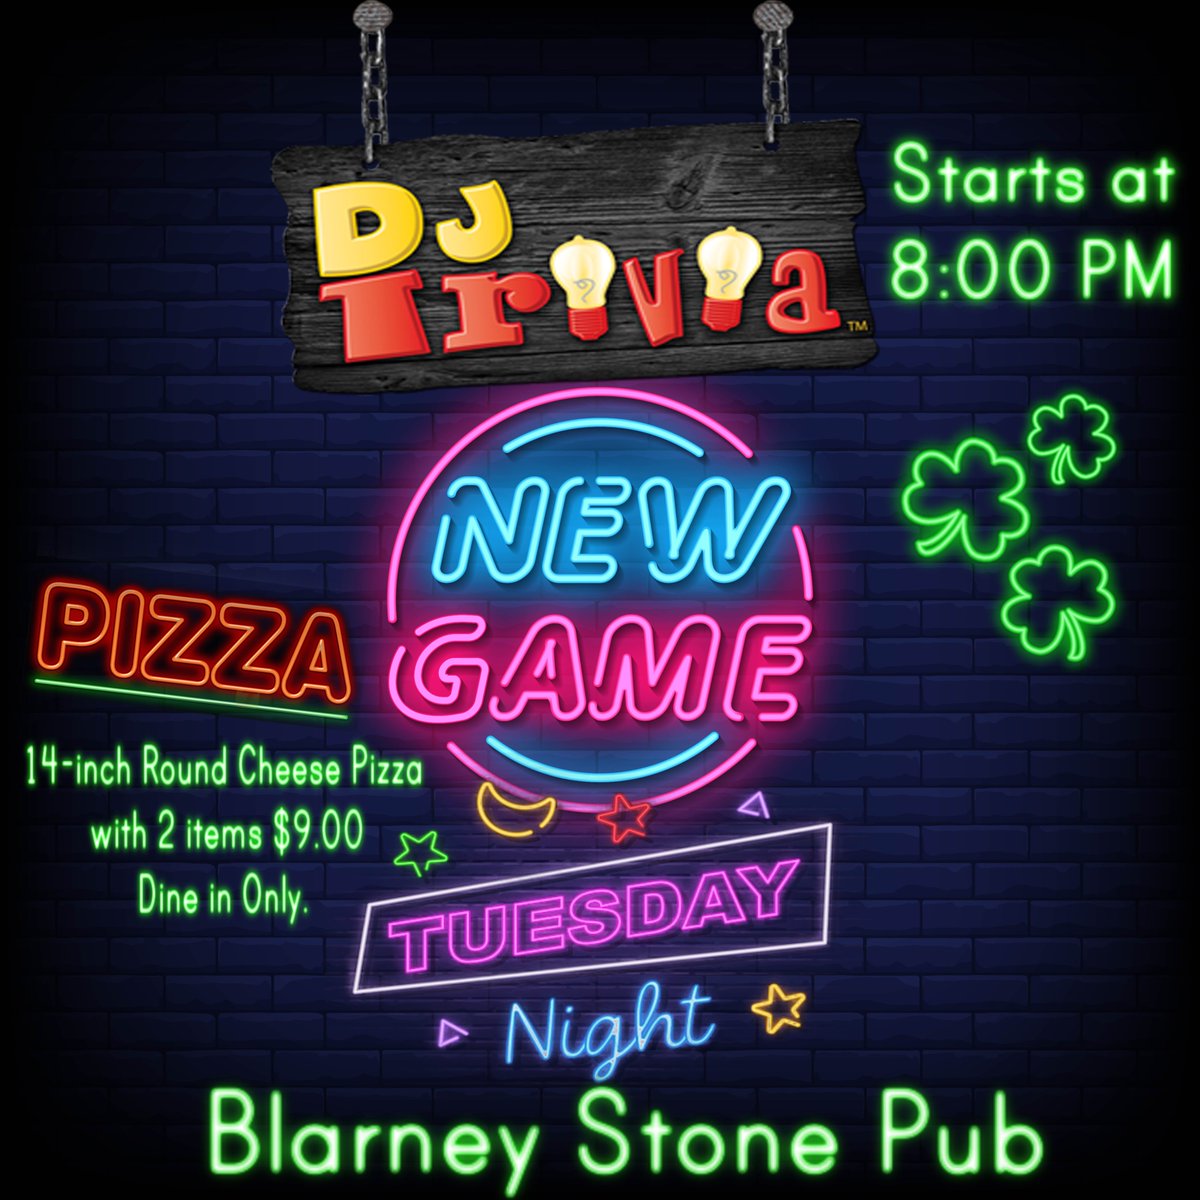 New Game starts at 8:00 PM Tuesdays, plus pizza and beer special Tuesday Special 14-inch round cheese pizza with 2 items $9.00 Dine in only $1.00 off Select Drafts: Michelob Ultra Blue Moon Miller Lite Bud Light.